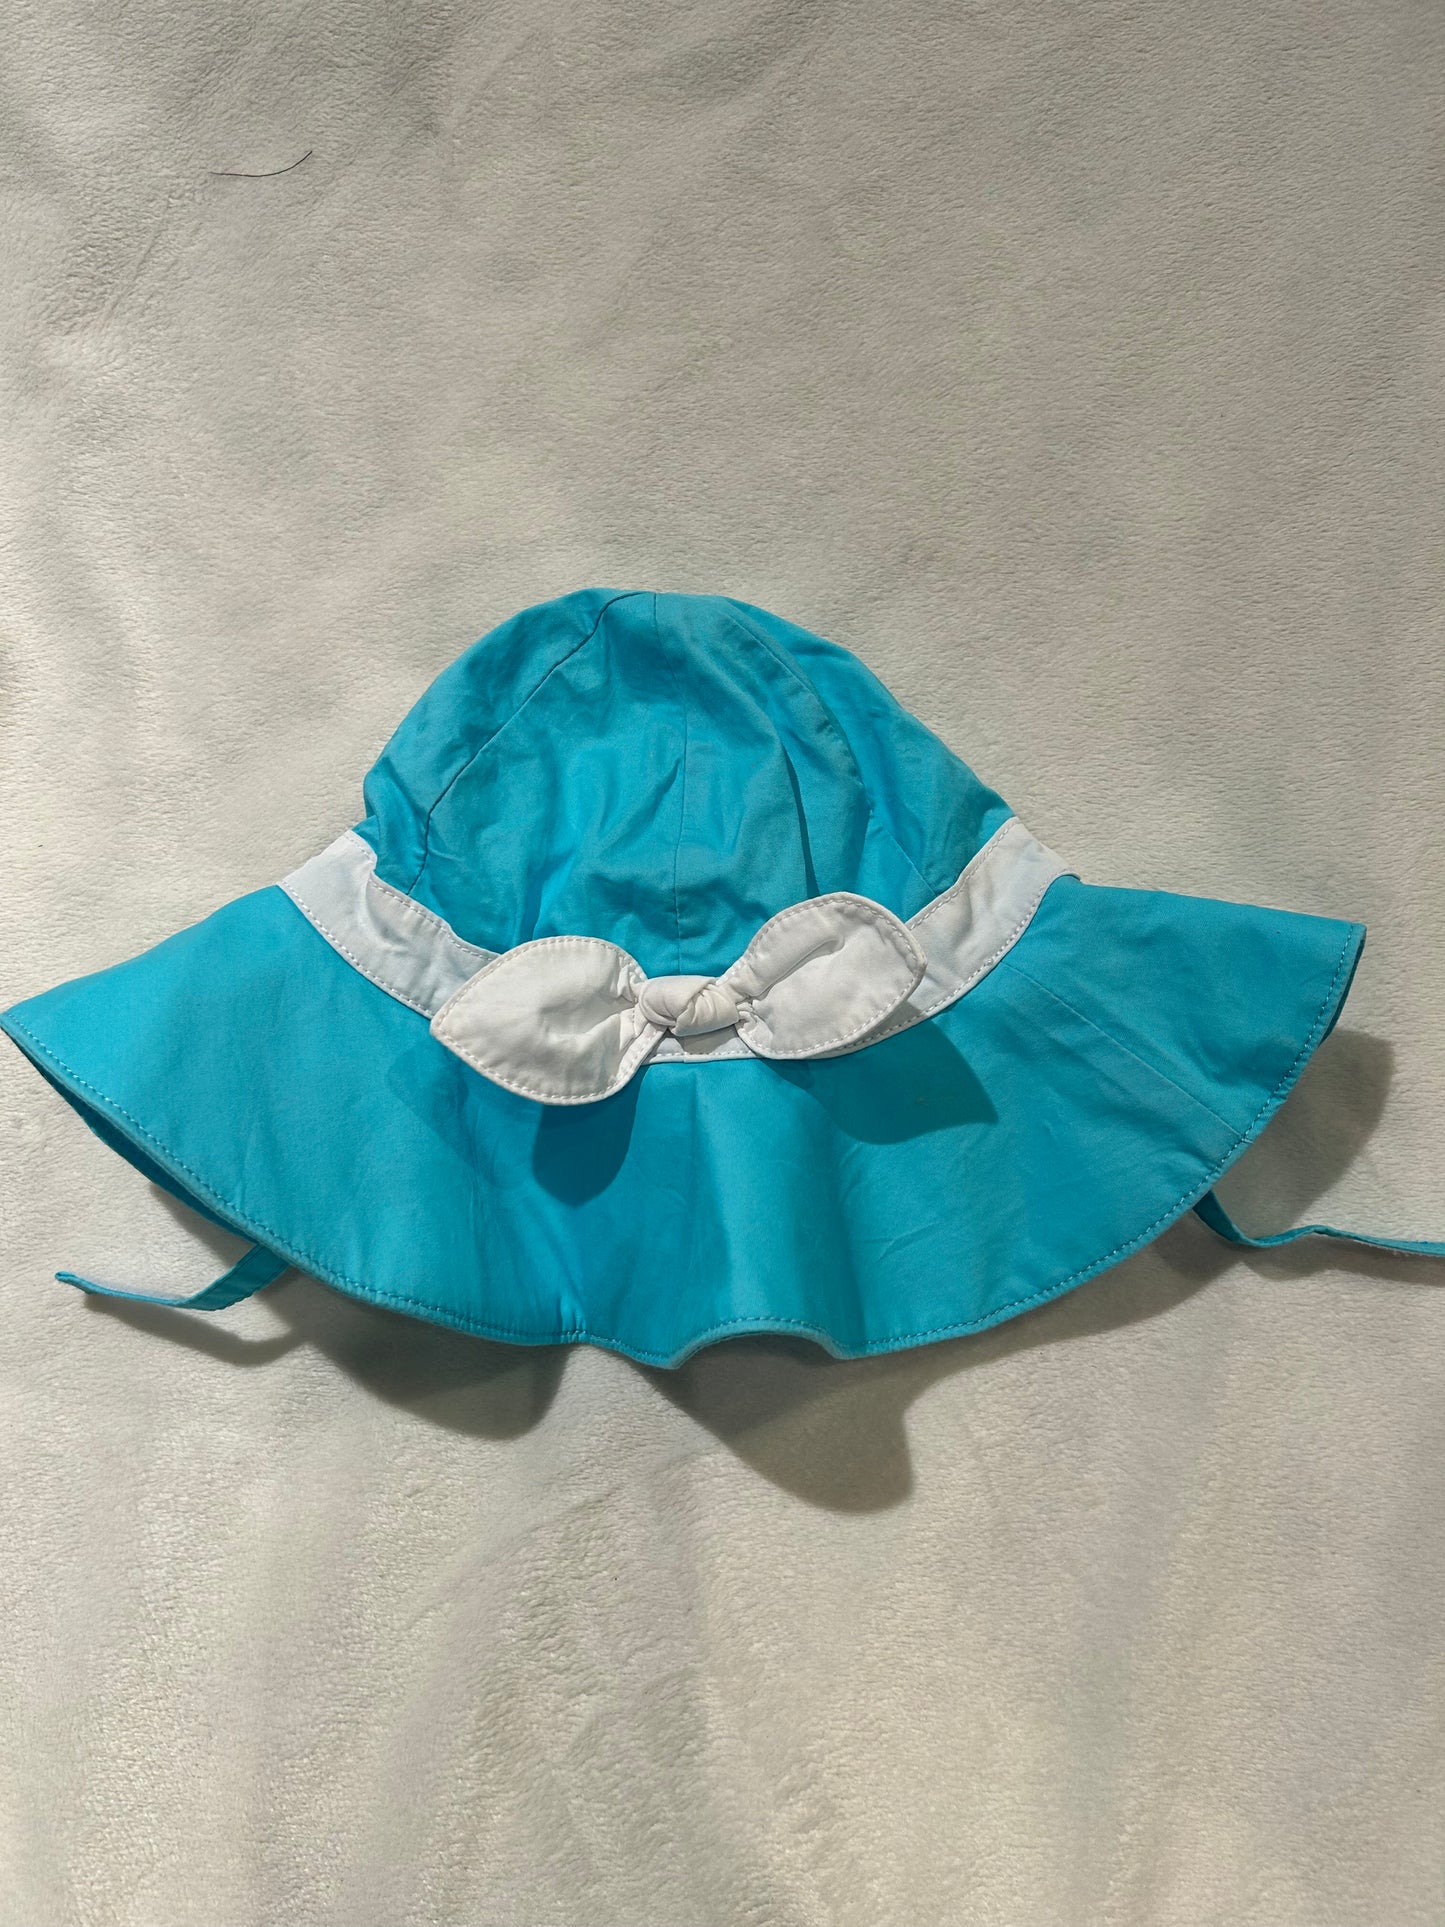 Girls 3-6 months beach hat - Teal with white bow